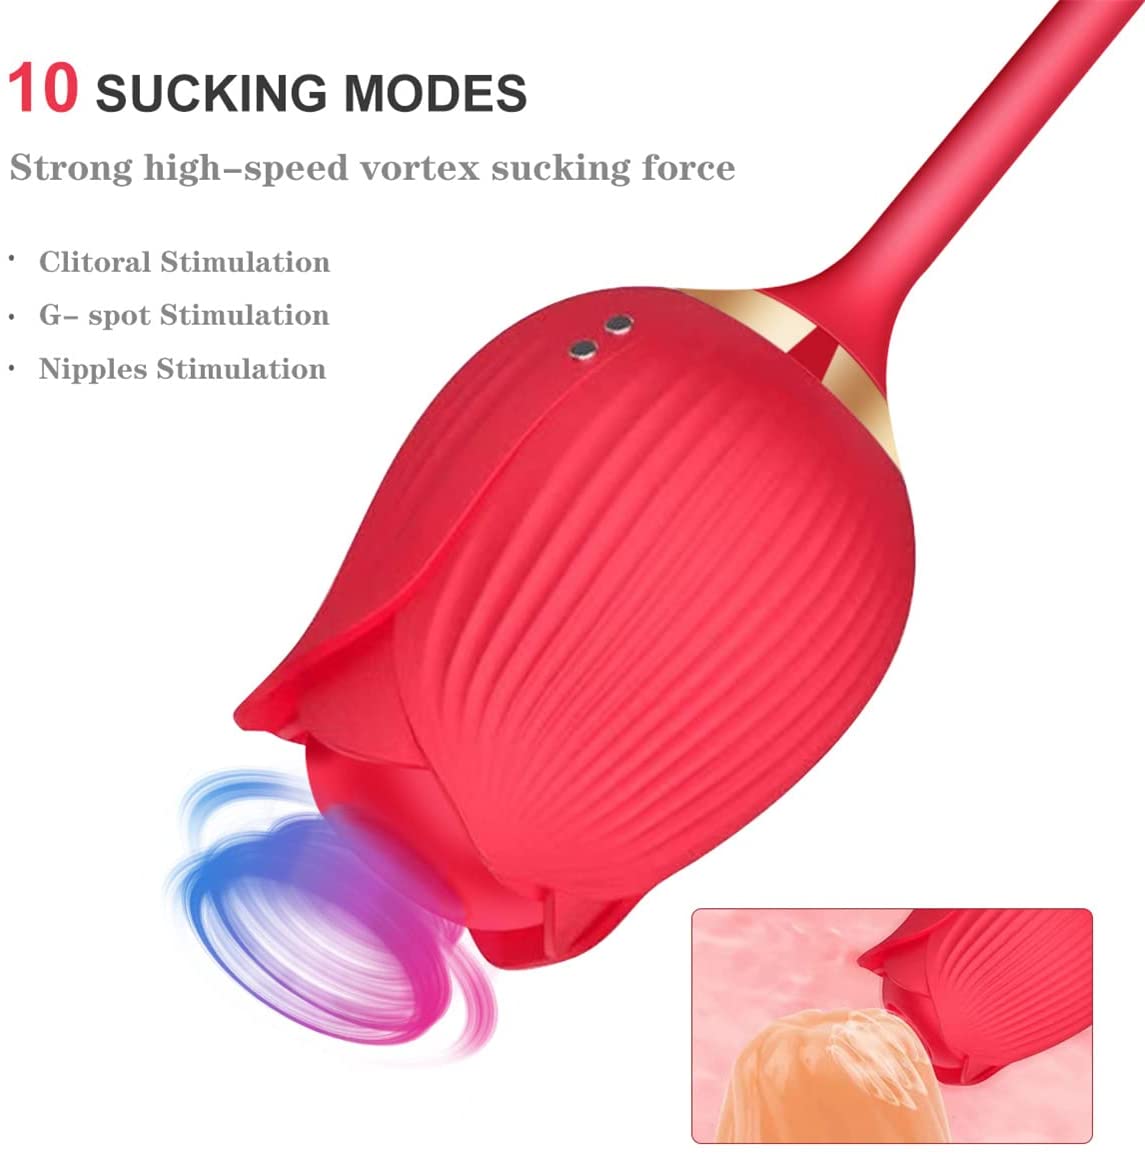 Upgurde 2 in 1 Rose Toys for Woman Pleasure Toy with Thrusting Dildo